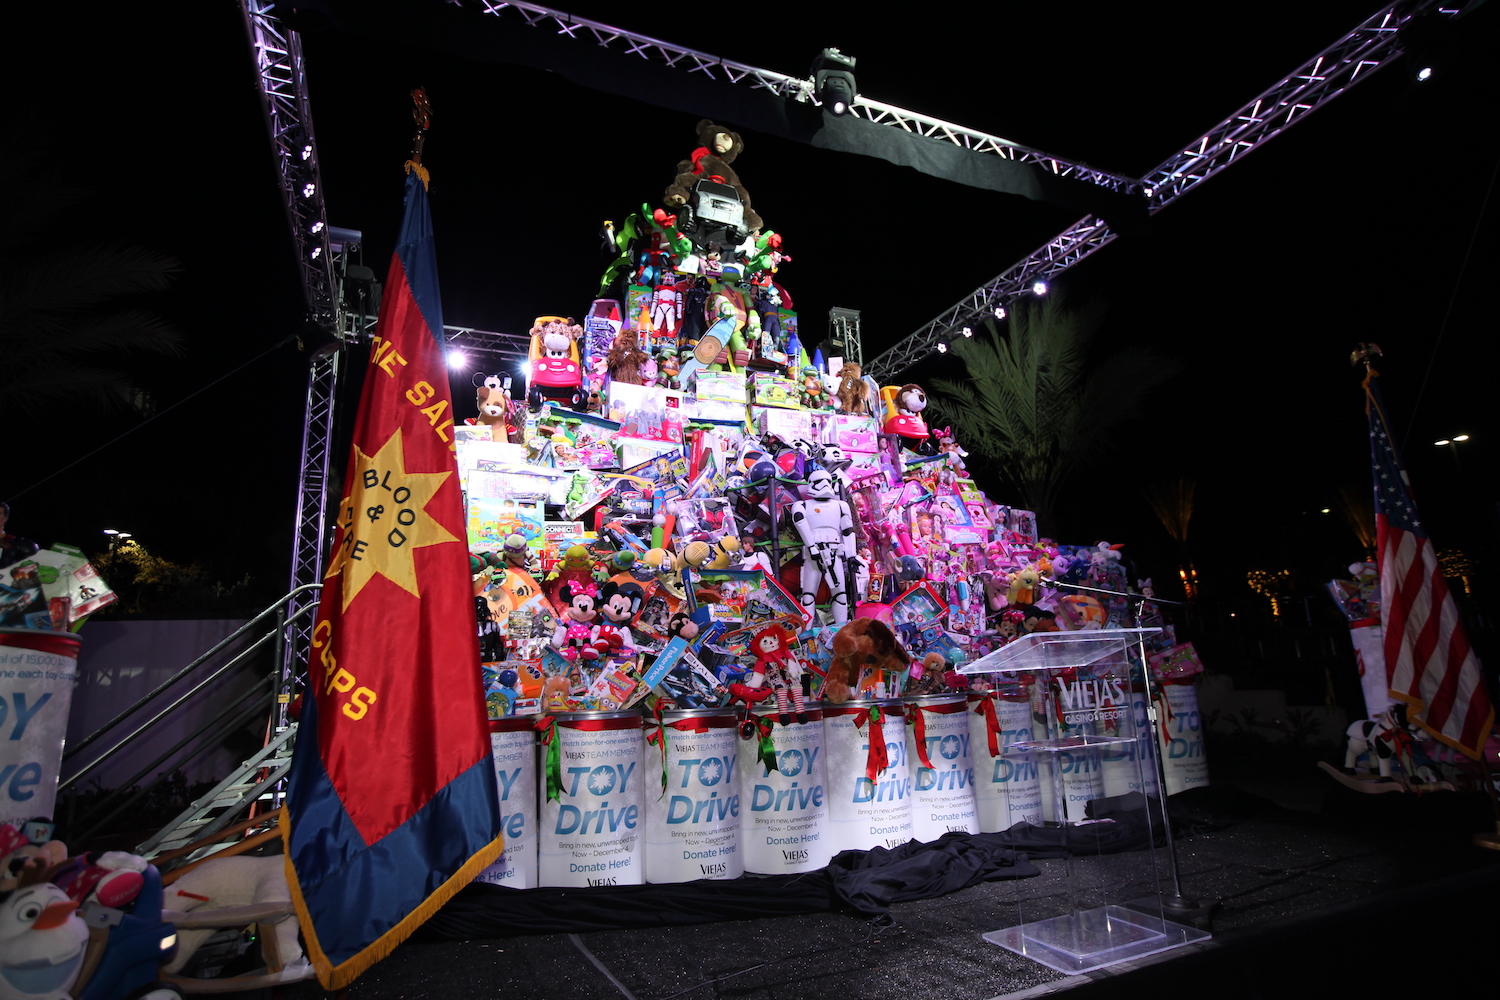 Viejas Band collects more than 17K toys at holiday casino drive